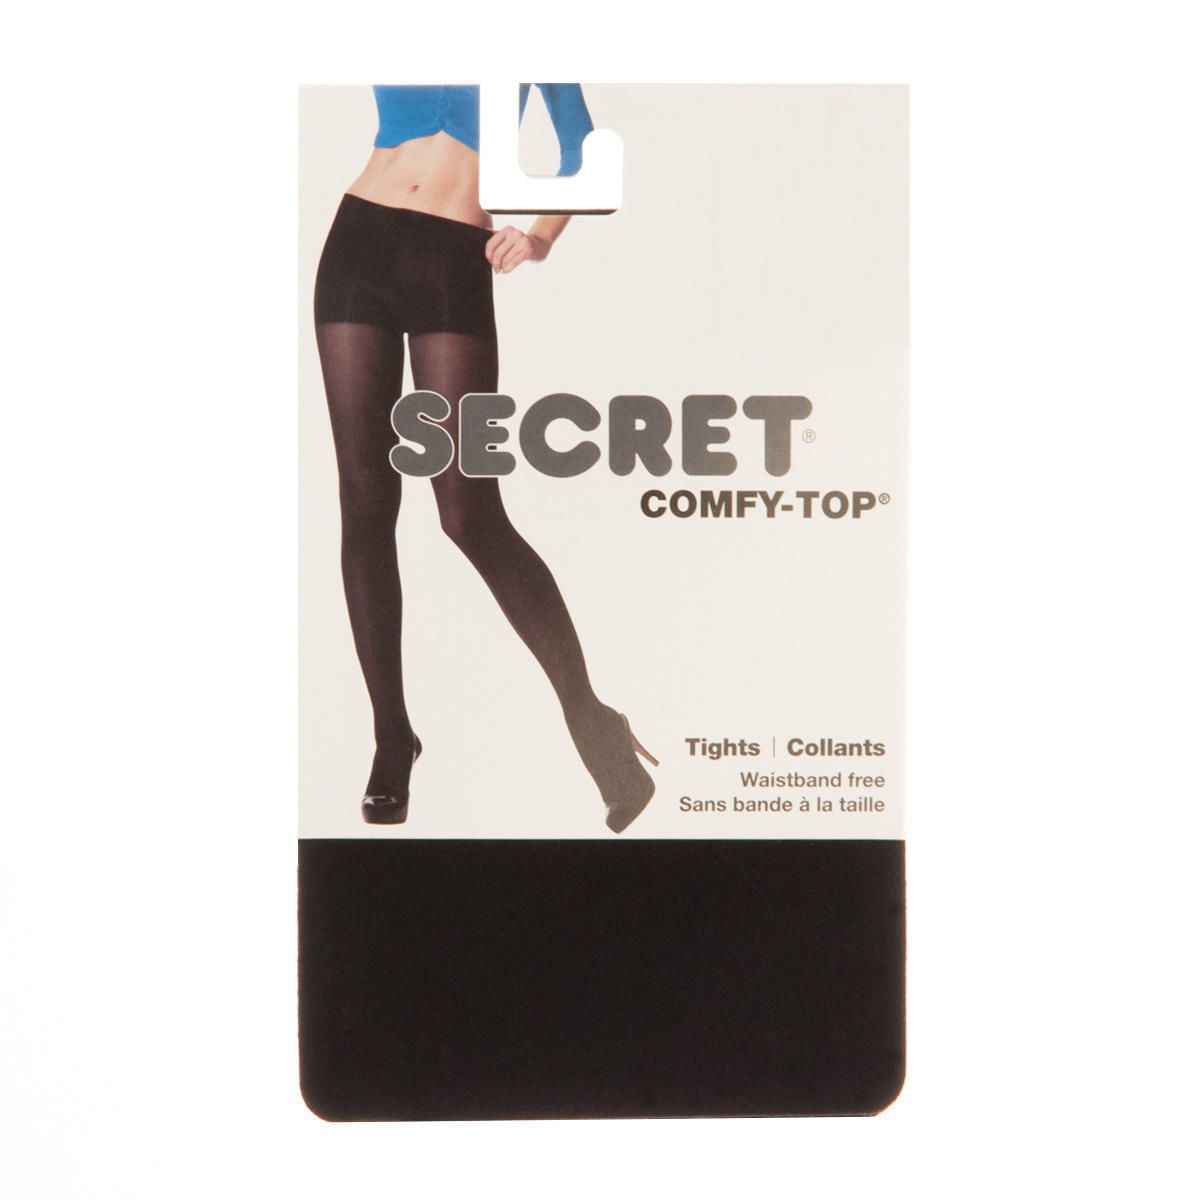 Secret® Comfy-Top Waistband-Free Tights 1pk, Size: A to D 